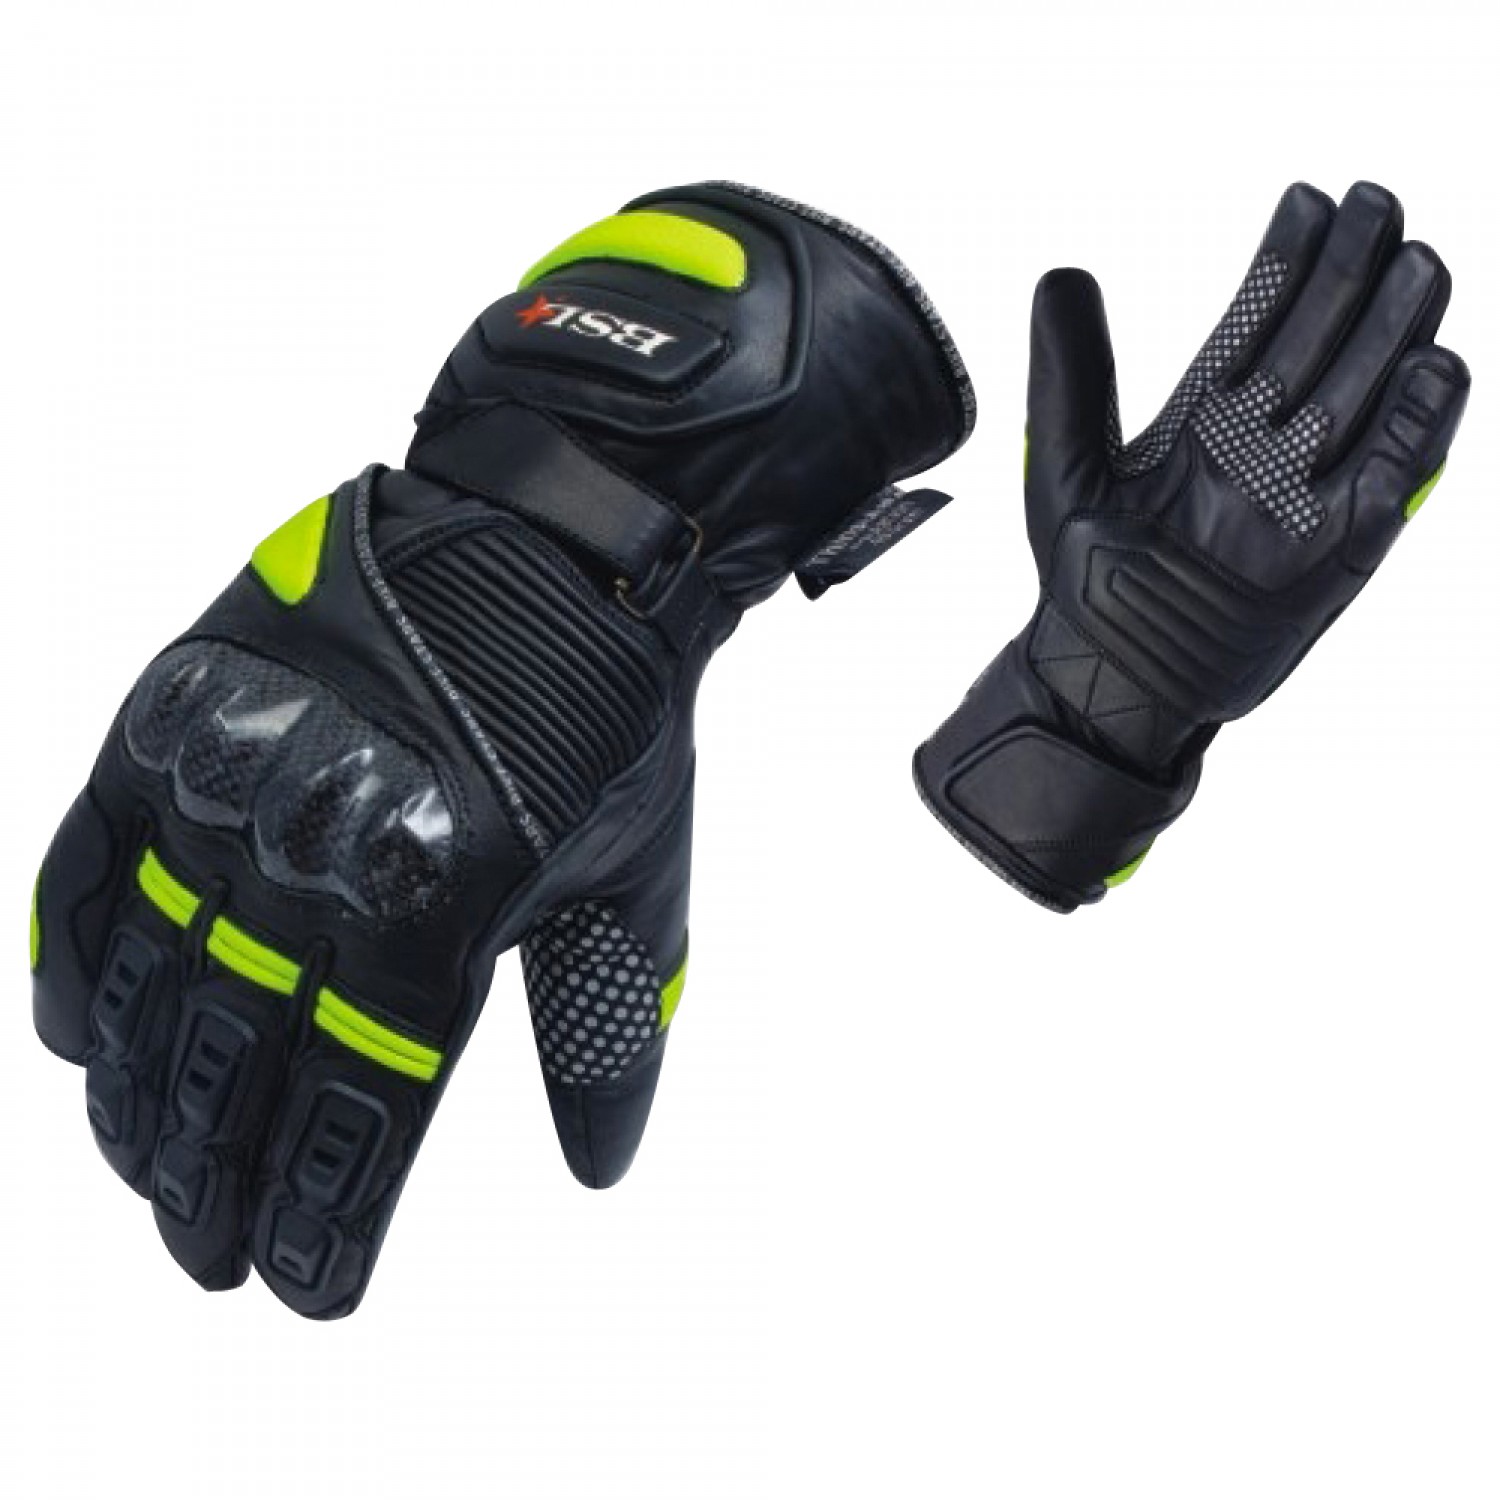 OFF TRACK WINTER LEATHER GLOVES